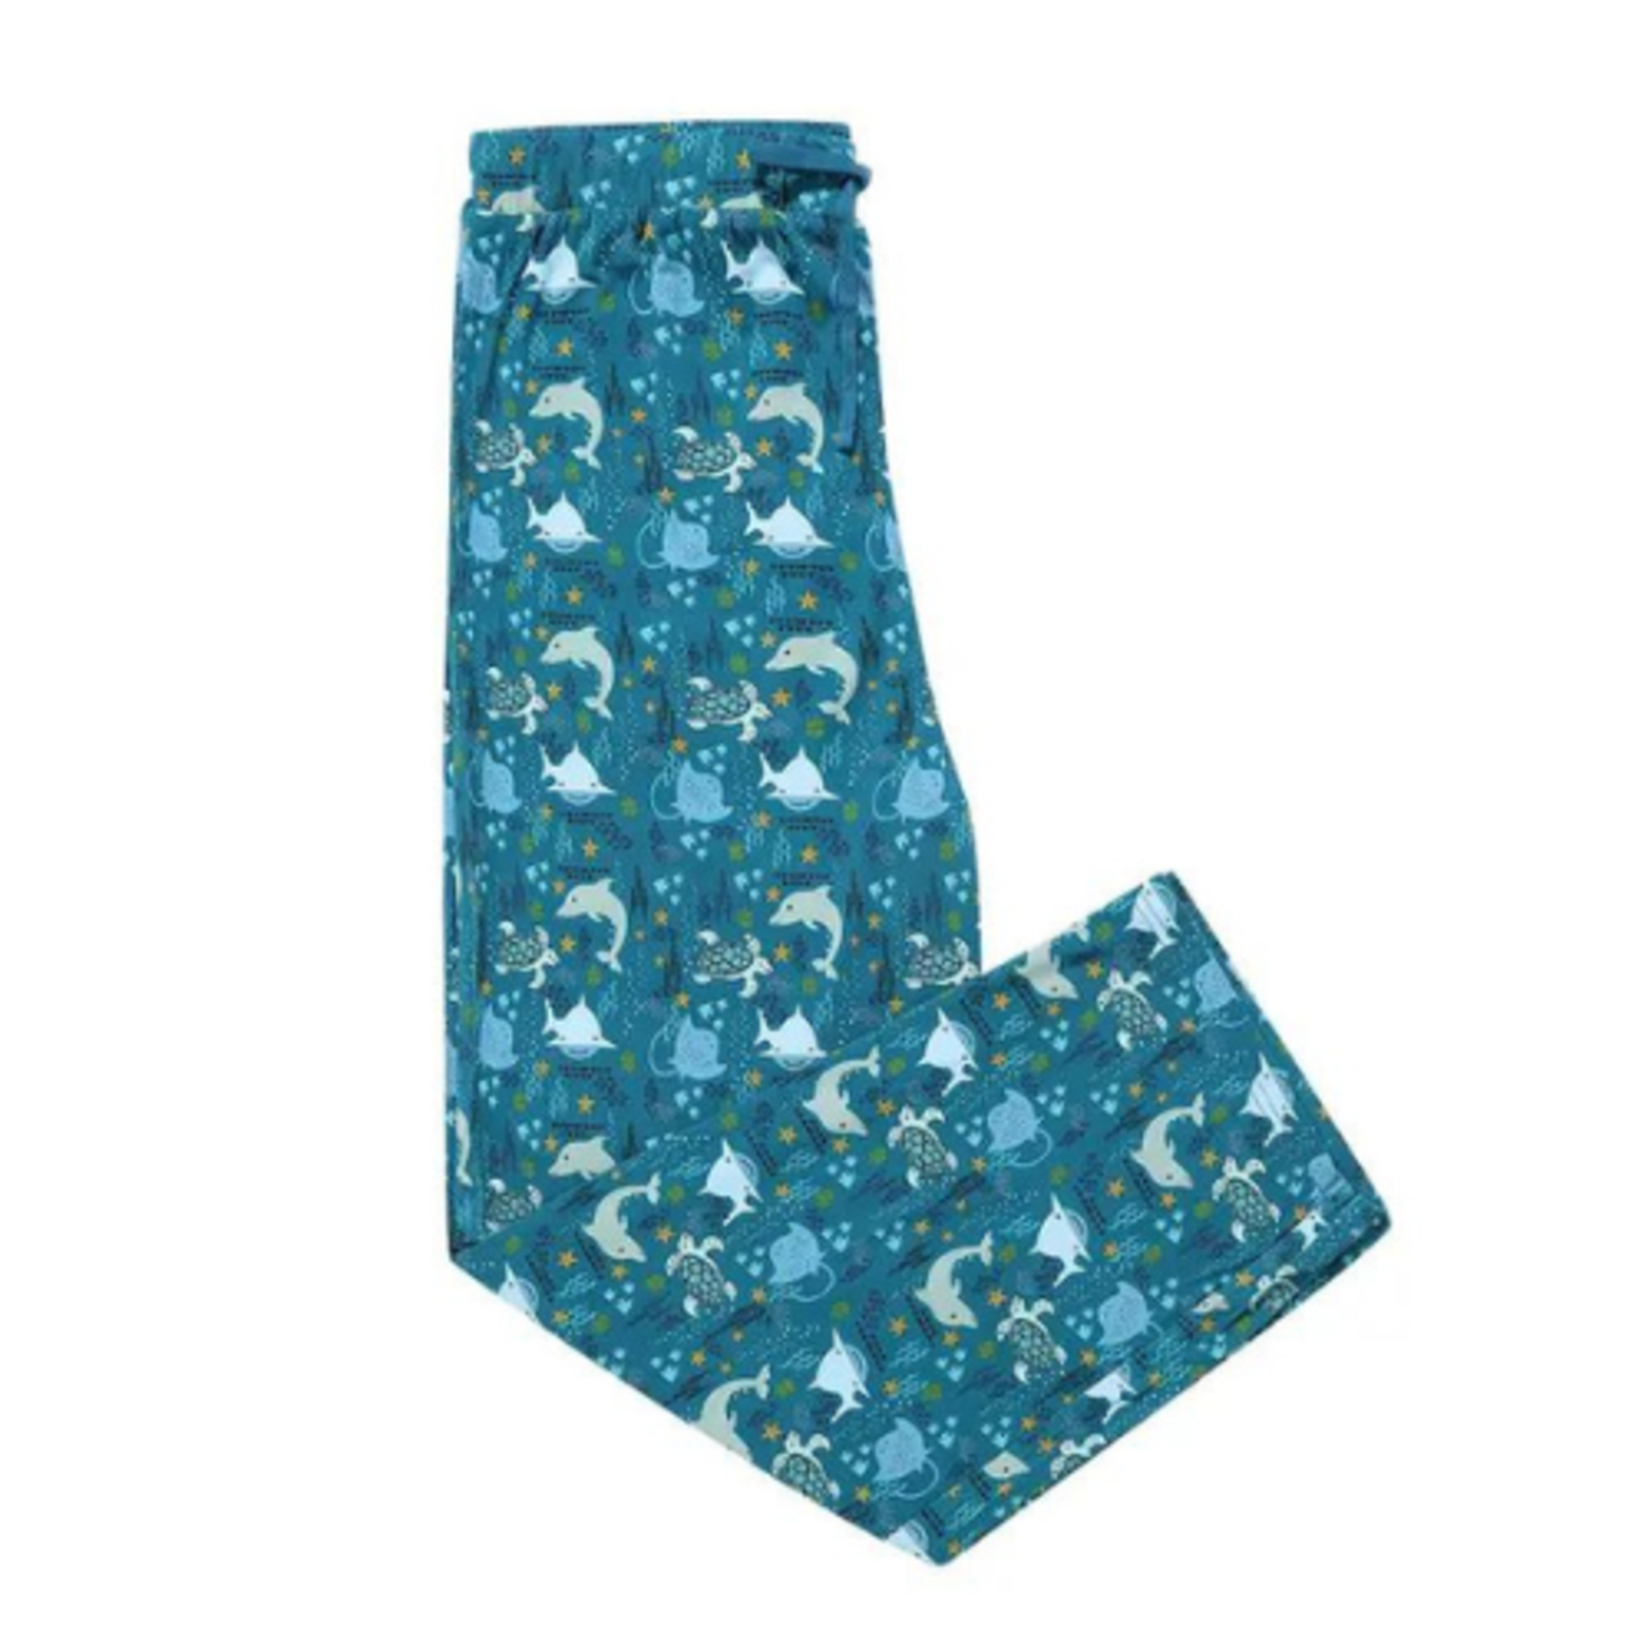 Emerson and Friends Ocean Friends Relaxed Bamboo Lounge Pajama Pants